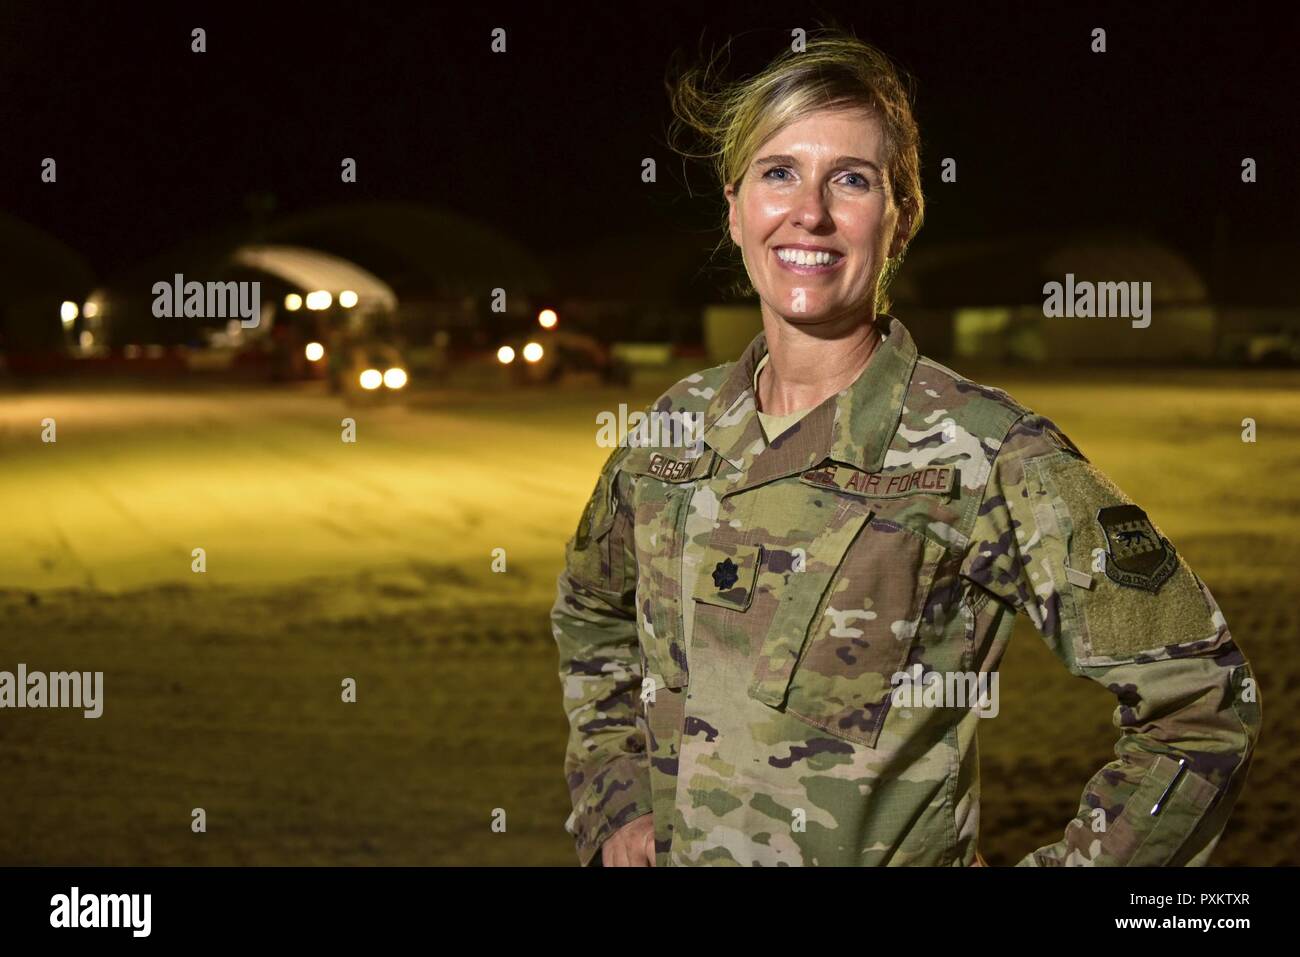 Lt. Col. Heidi Gibson, 407th Expeditionary Civil Engineer Squadron commander, poses for a photo June 7, 2017, at the 407th Air Expeditionary Group in Southwest Asia. Gibson enlisted in the California Air National Guard in 1986 then later commissioned. She has had success in her civilian and military career, holding the titles of principal in her very own architecture firm and field grade officer with the Air National Guard as the 163rd Civil Engineer Squadron commander at March Air Reserve Base, Calif. Stock Photo